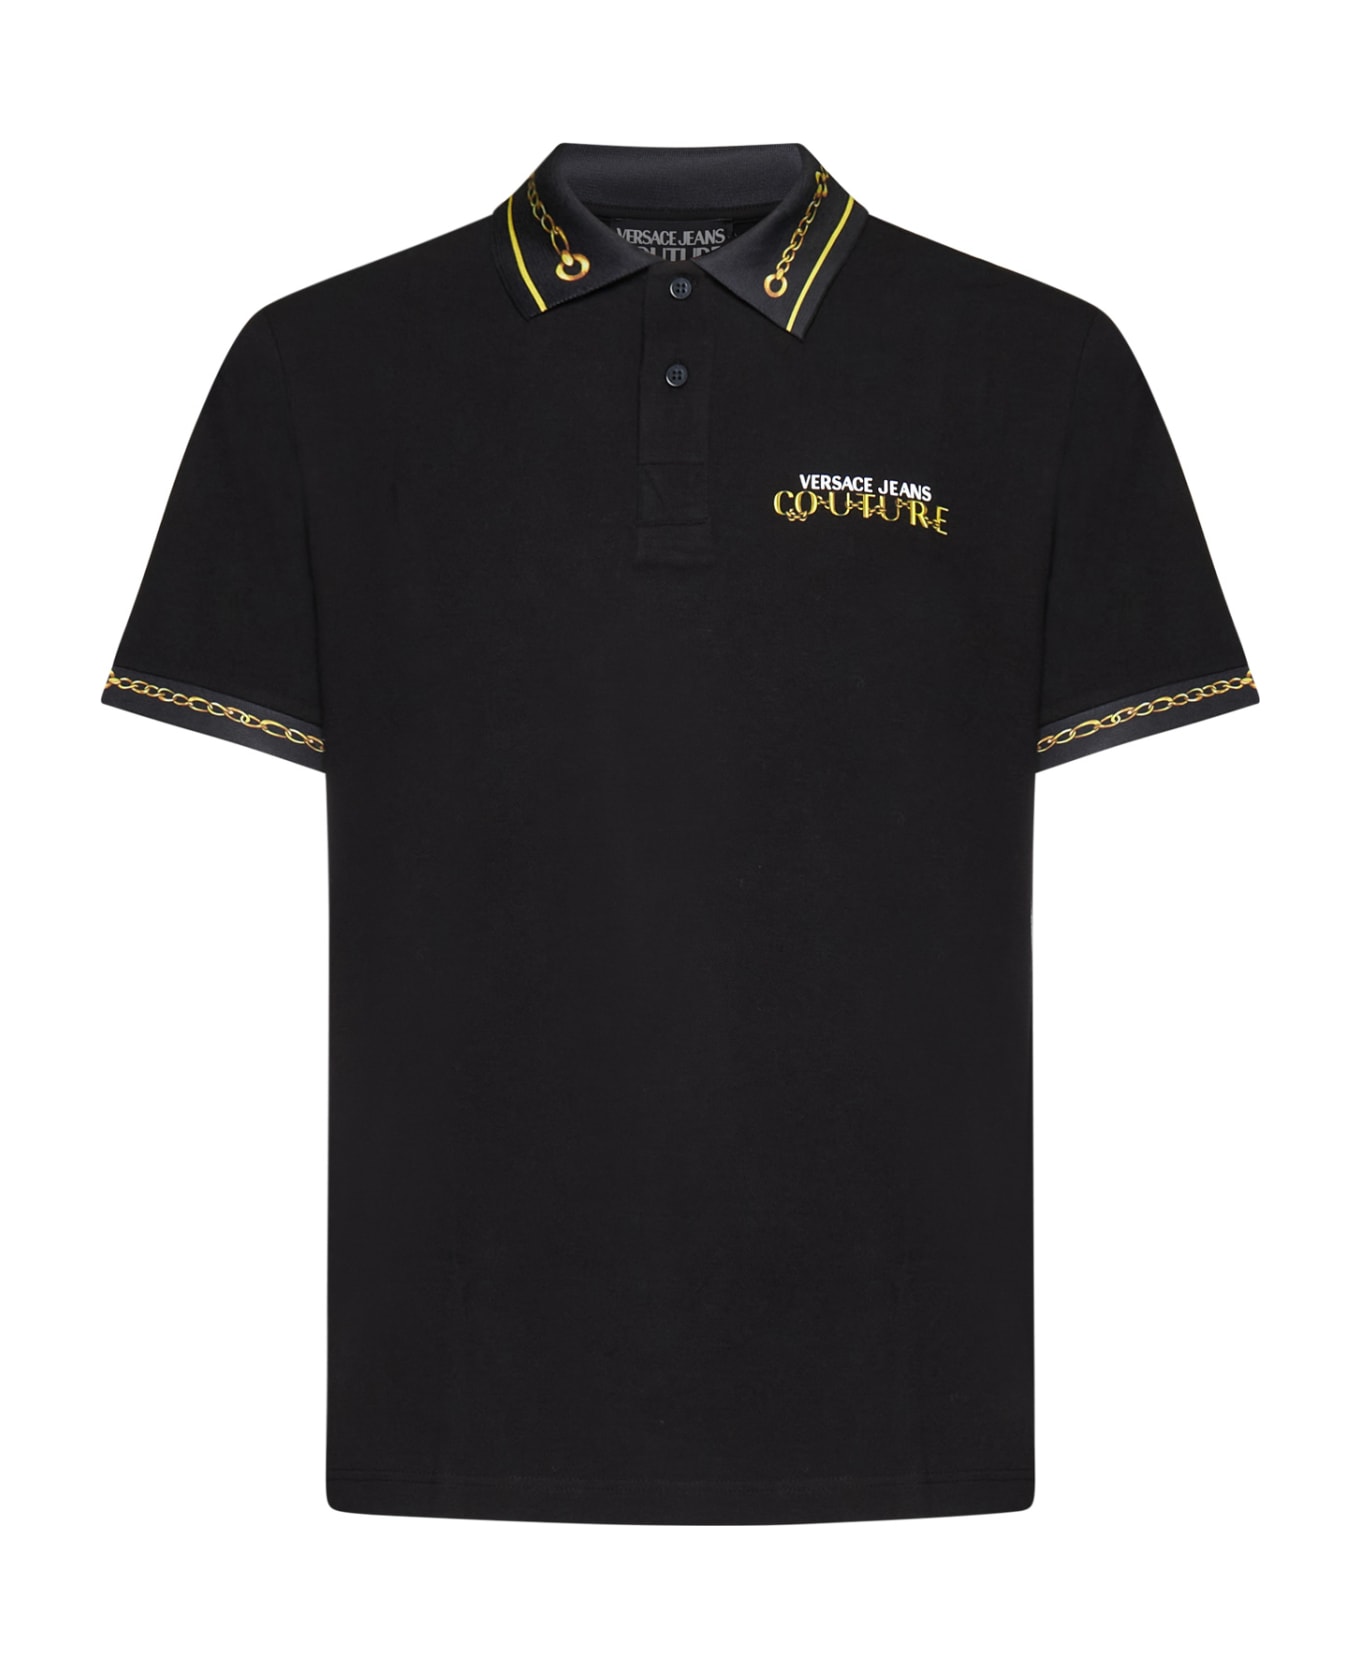 Versace Jeans Couture Chain-link Polo Shirt - Black gold ポロシャツ